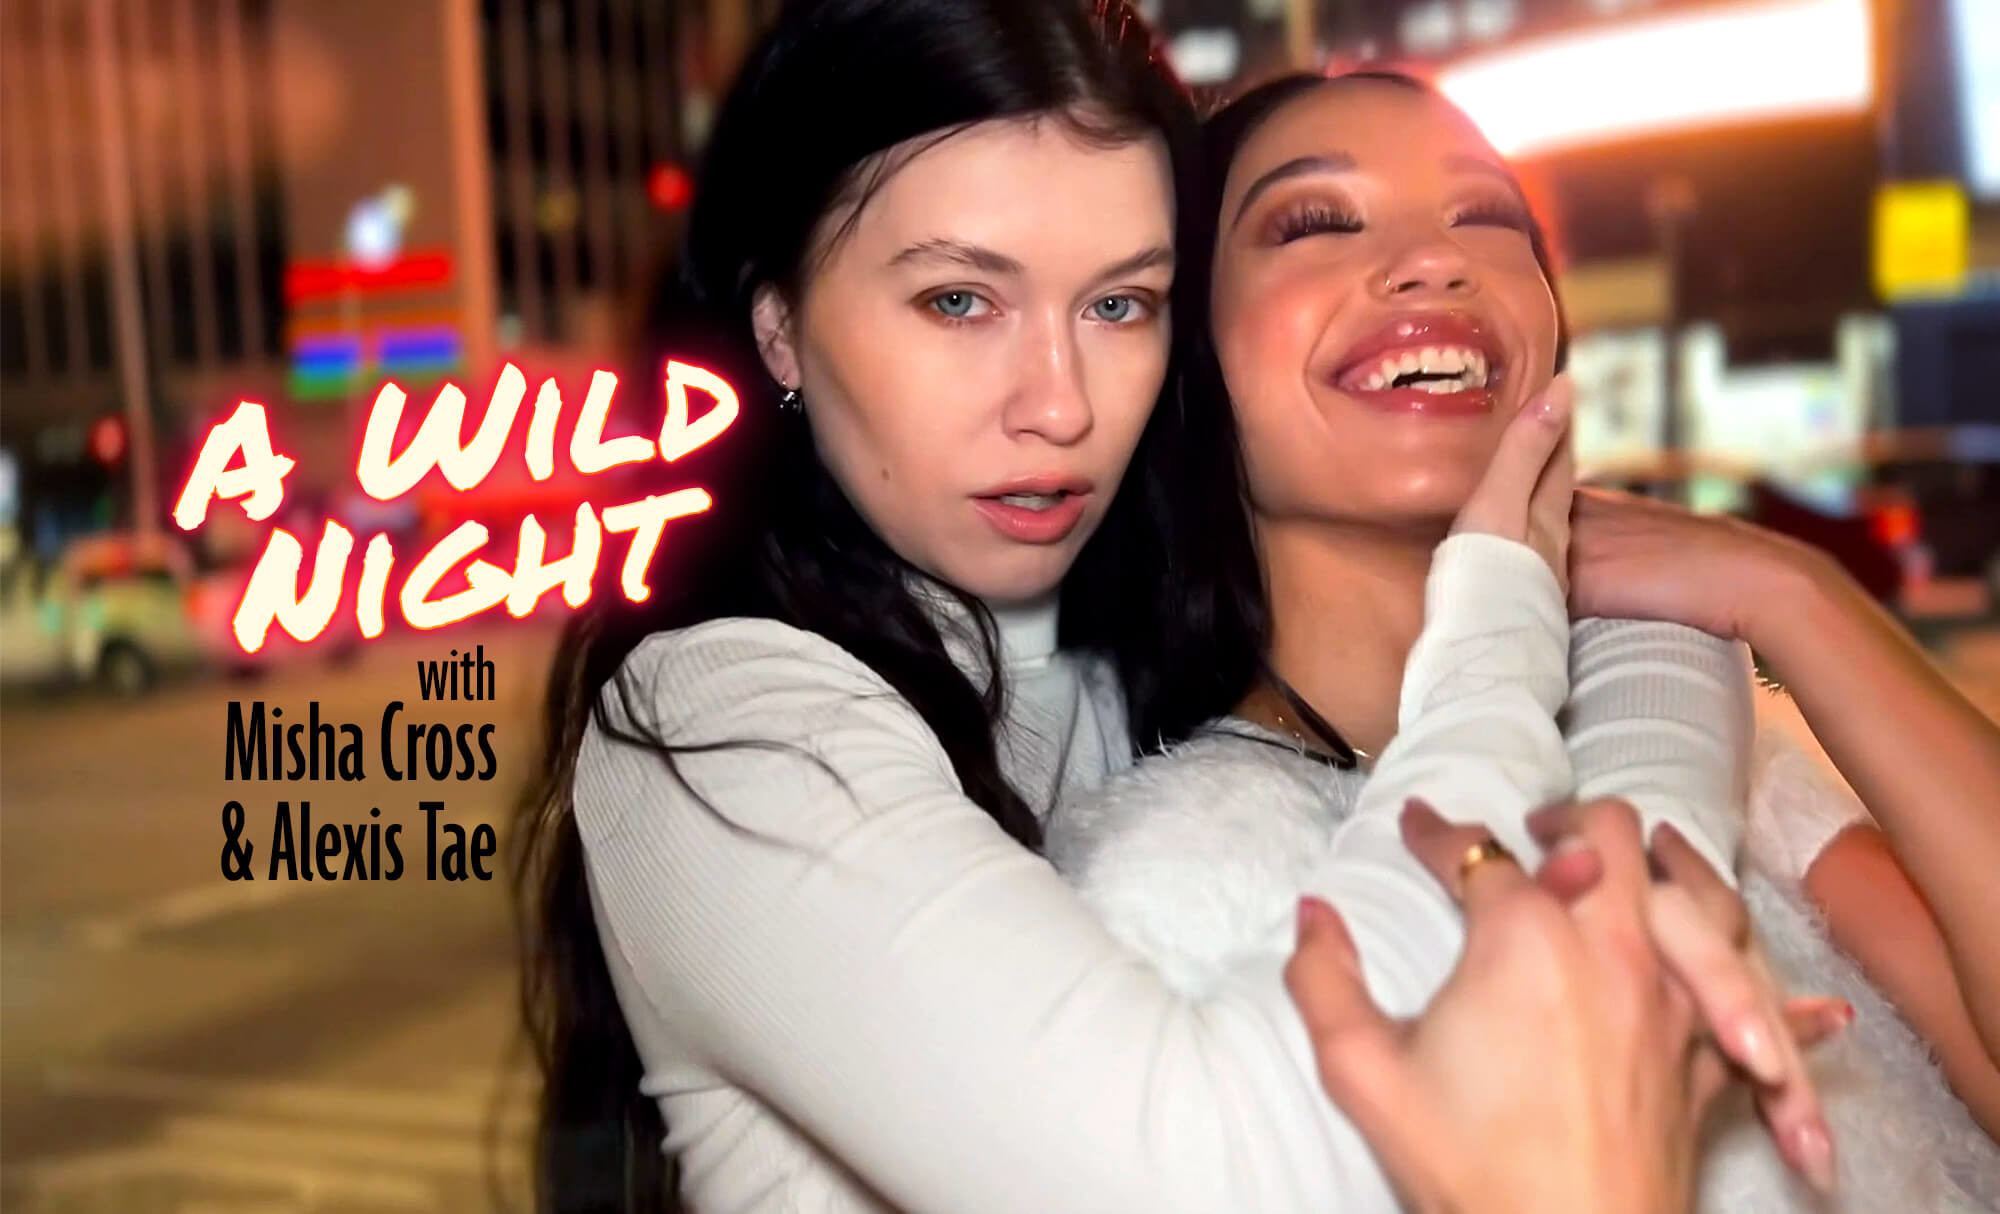 Download A Wild Night with Misha Cross & Alexis Tae by LifeSelector.